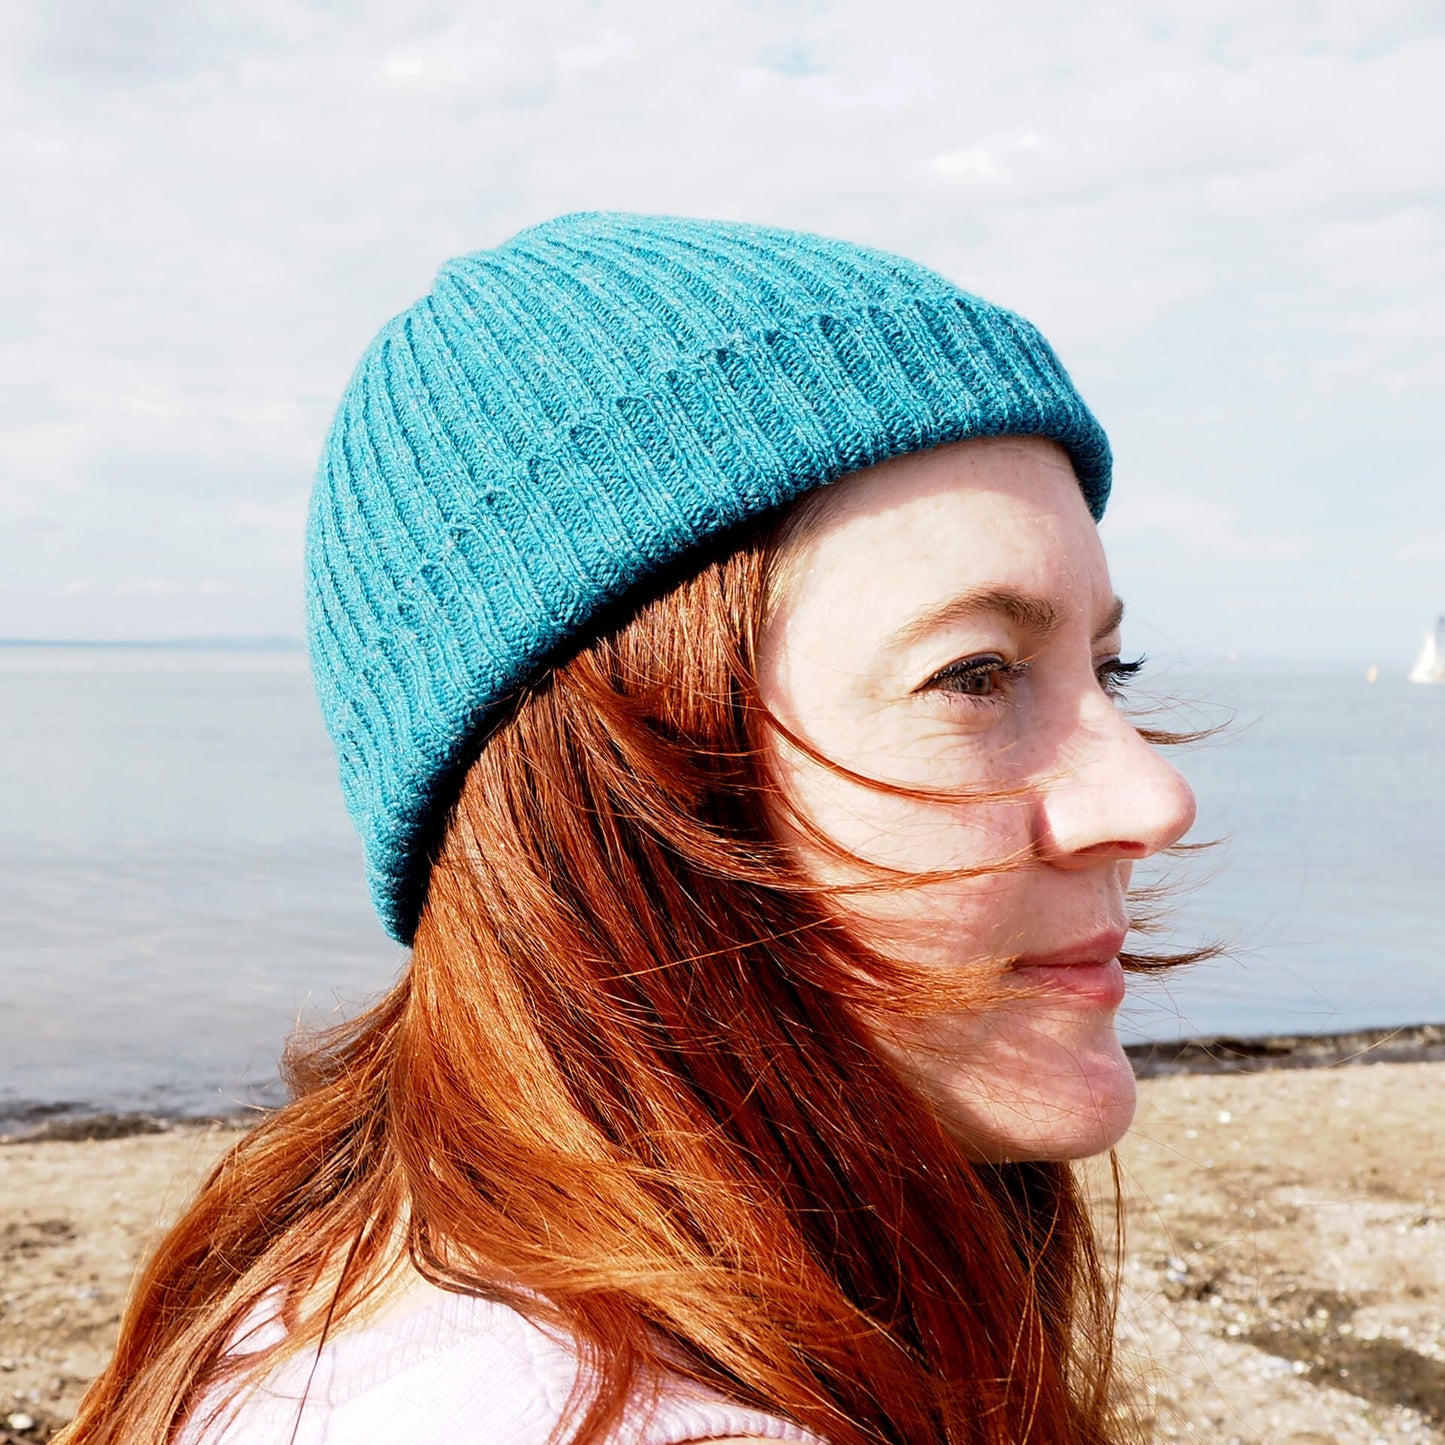 A profile view of a woman with red hair wears a blue ribbed beanie by K.Moods.